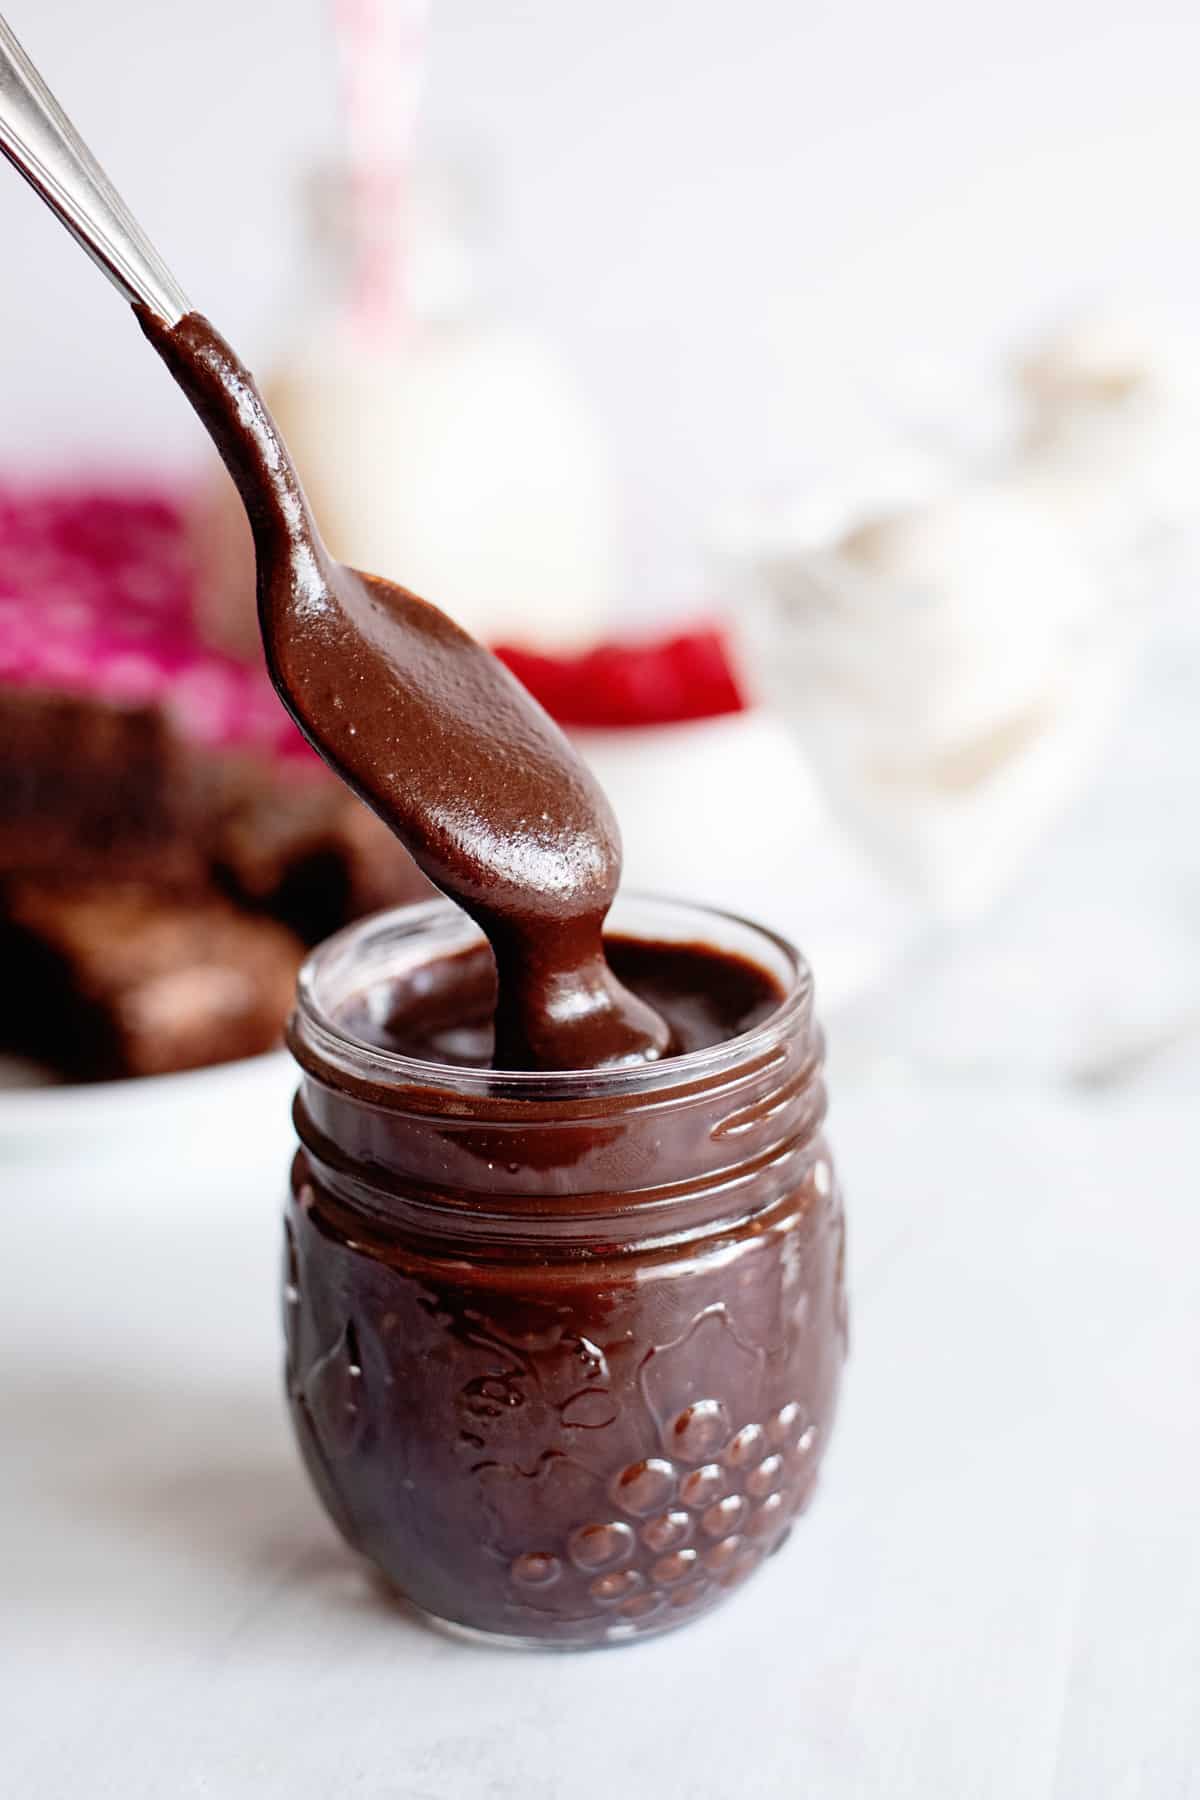 a spoon dipping into a jar of homemade hot fudge